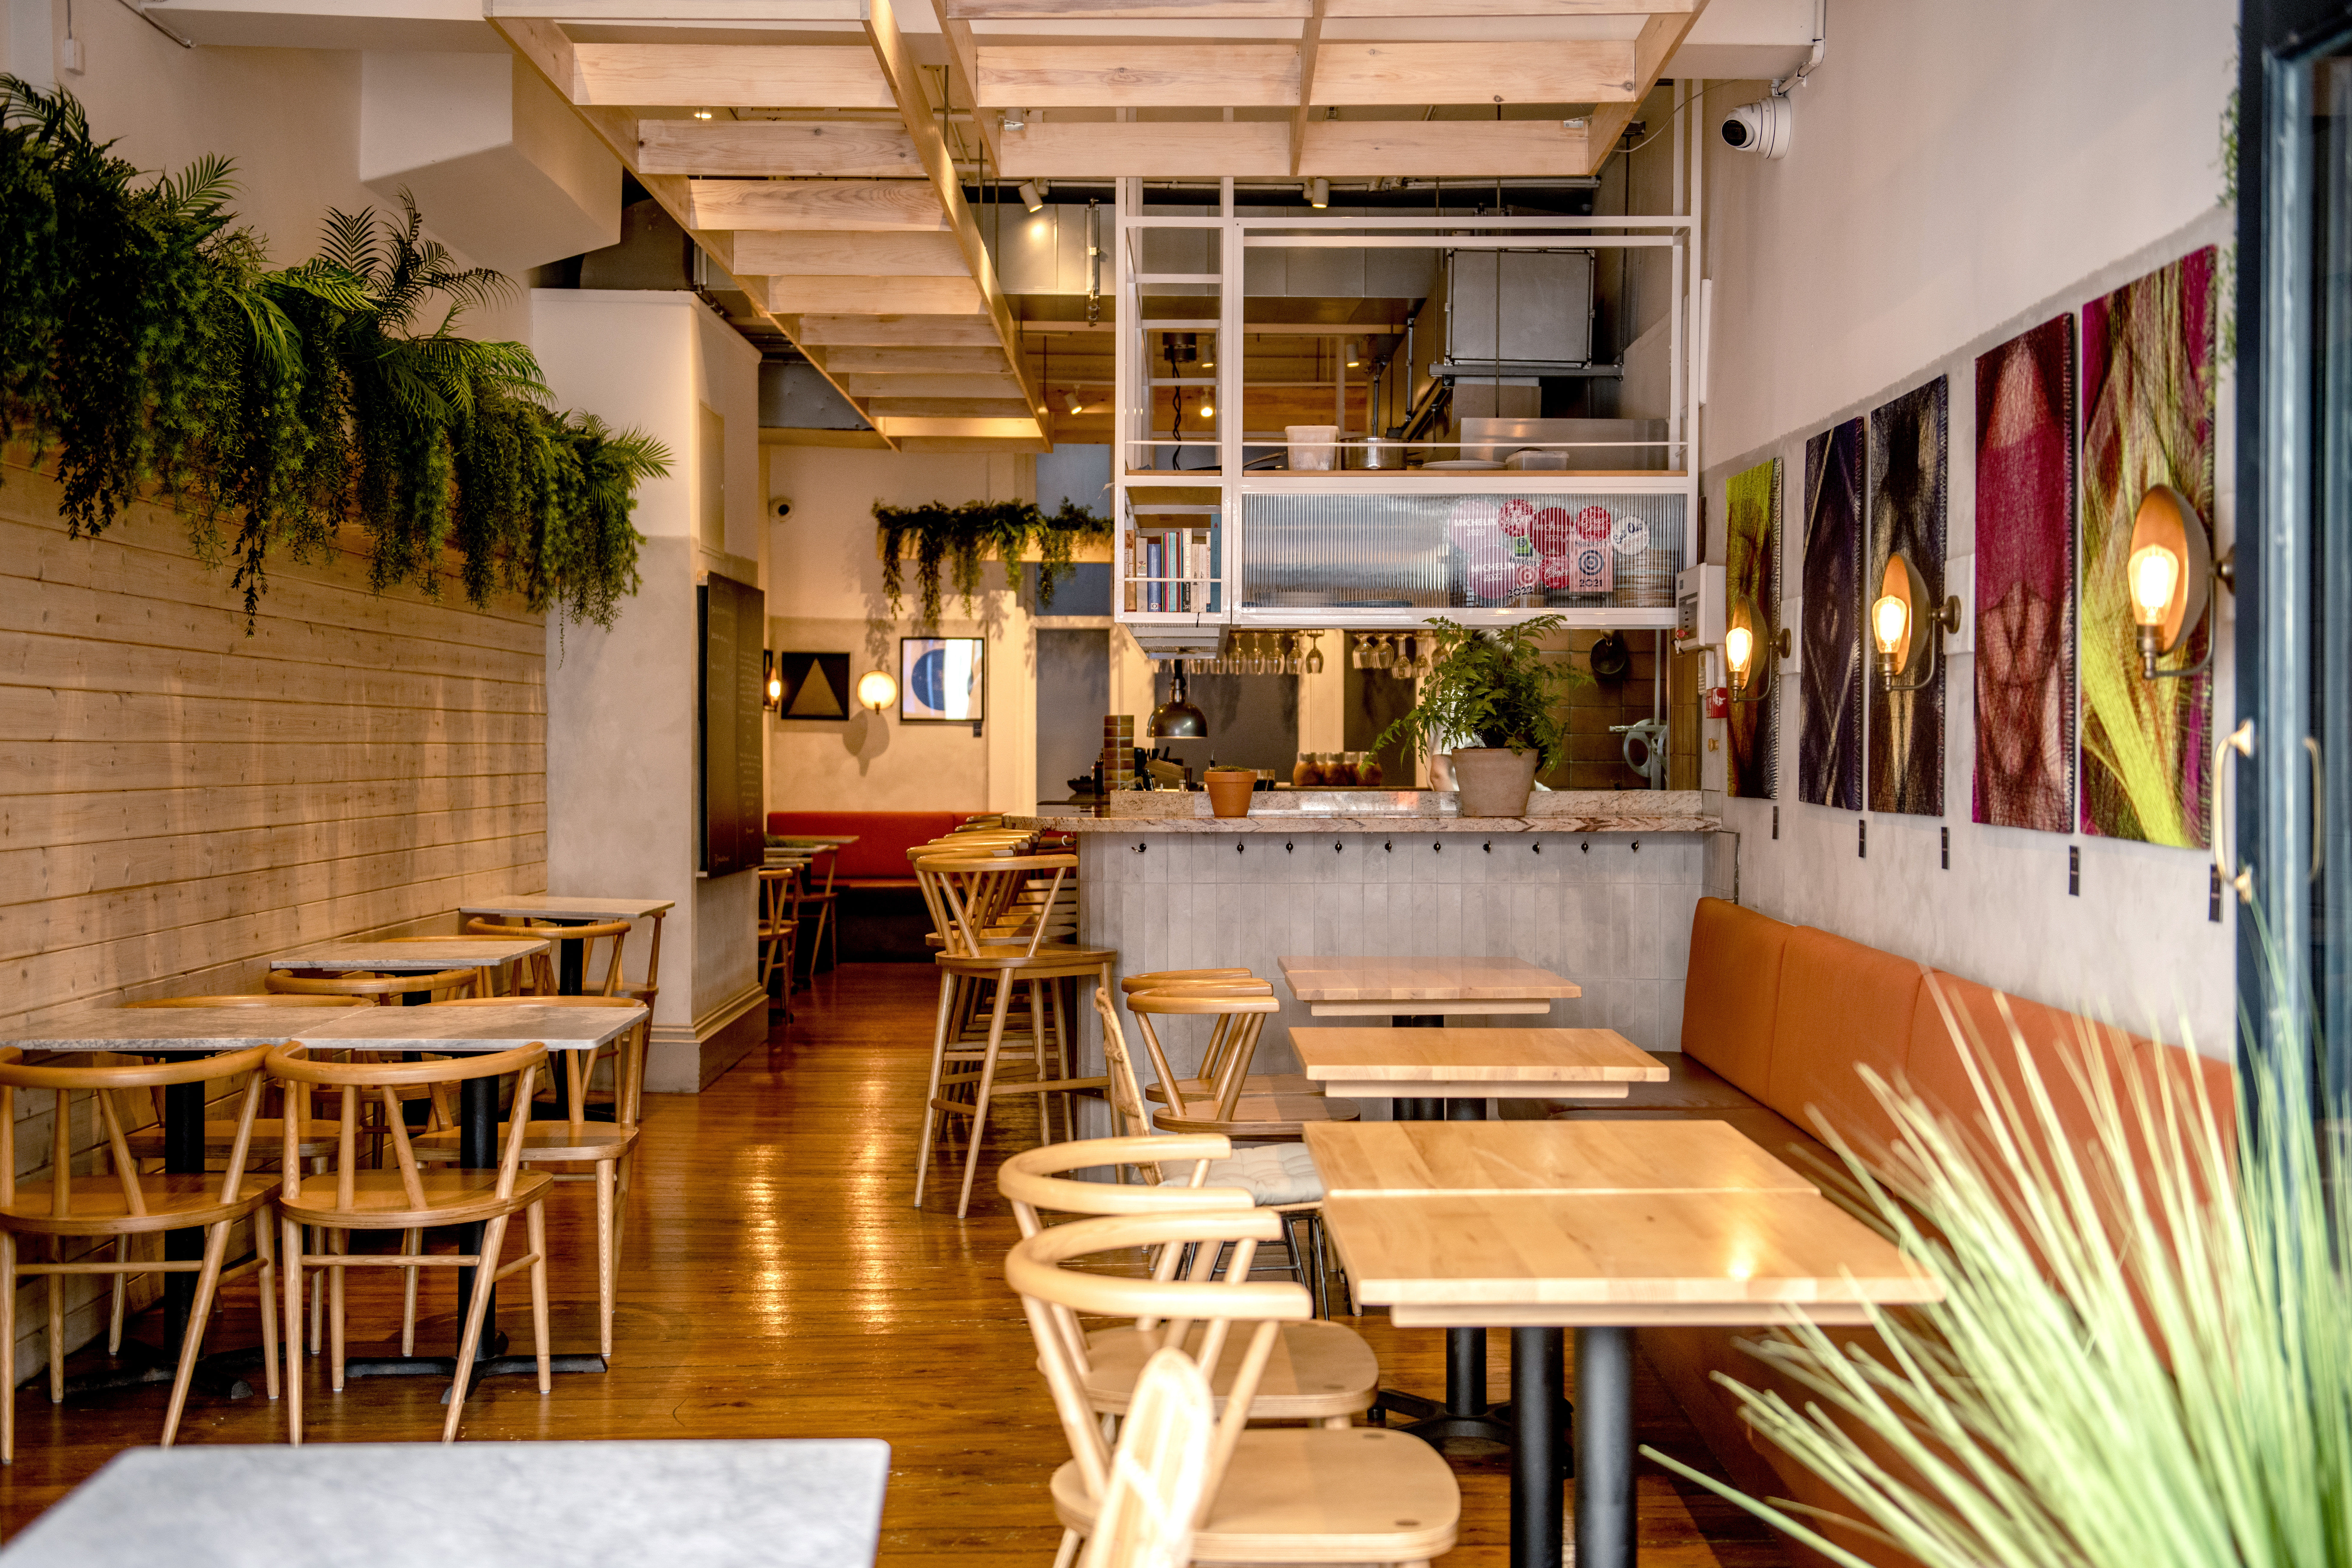 Kindling restaurant, interior shot with open kitchen and scandi style